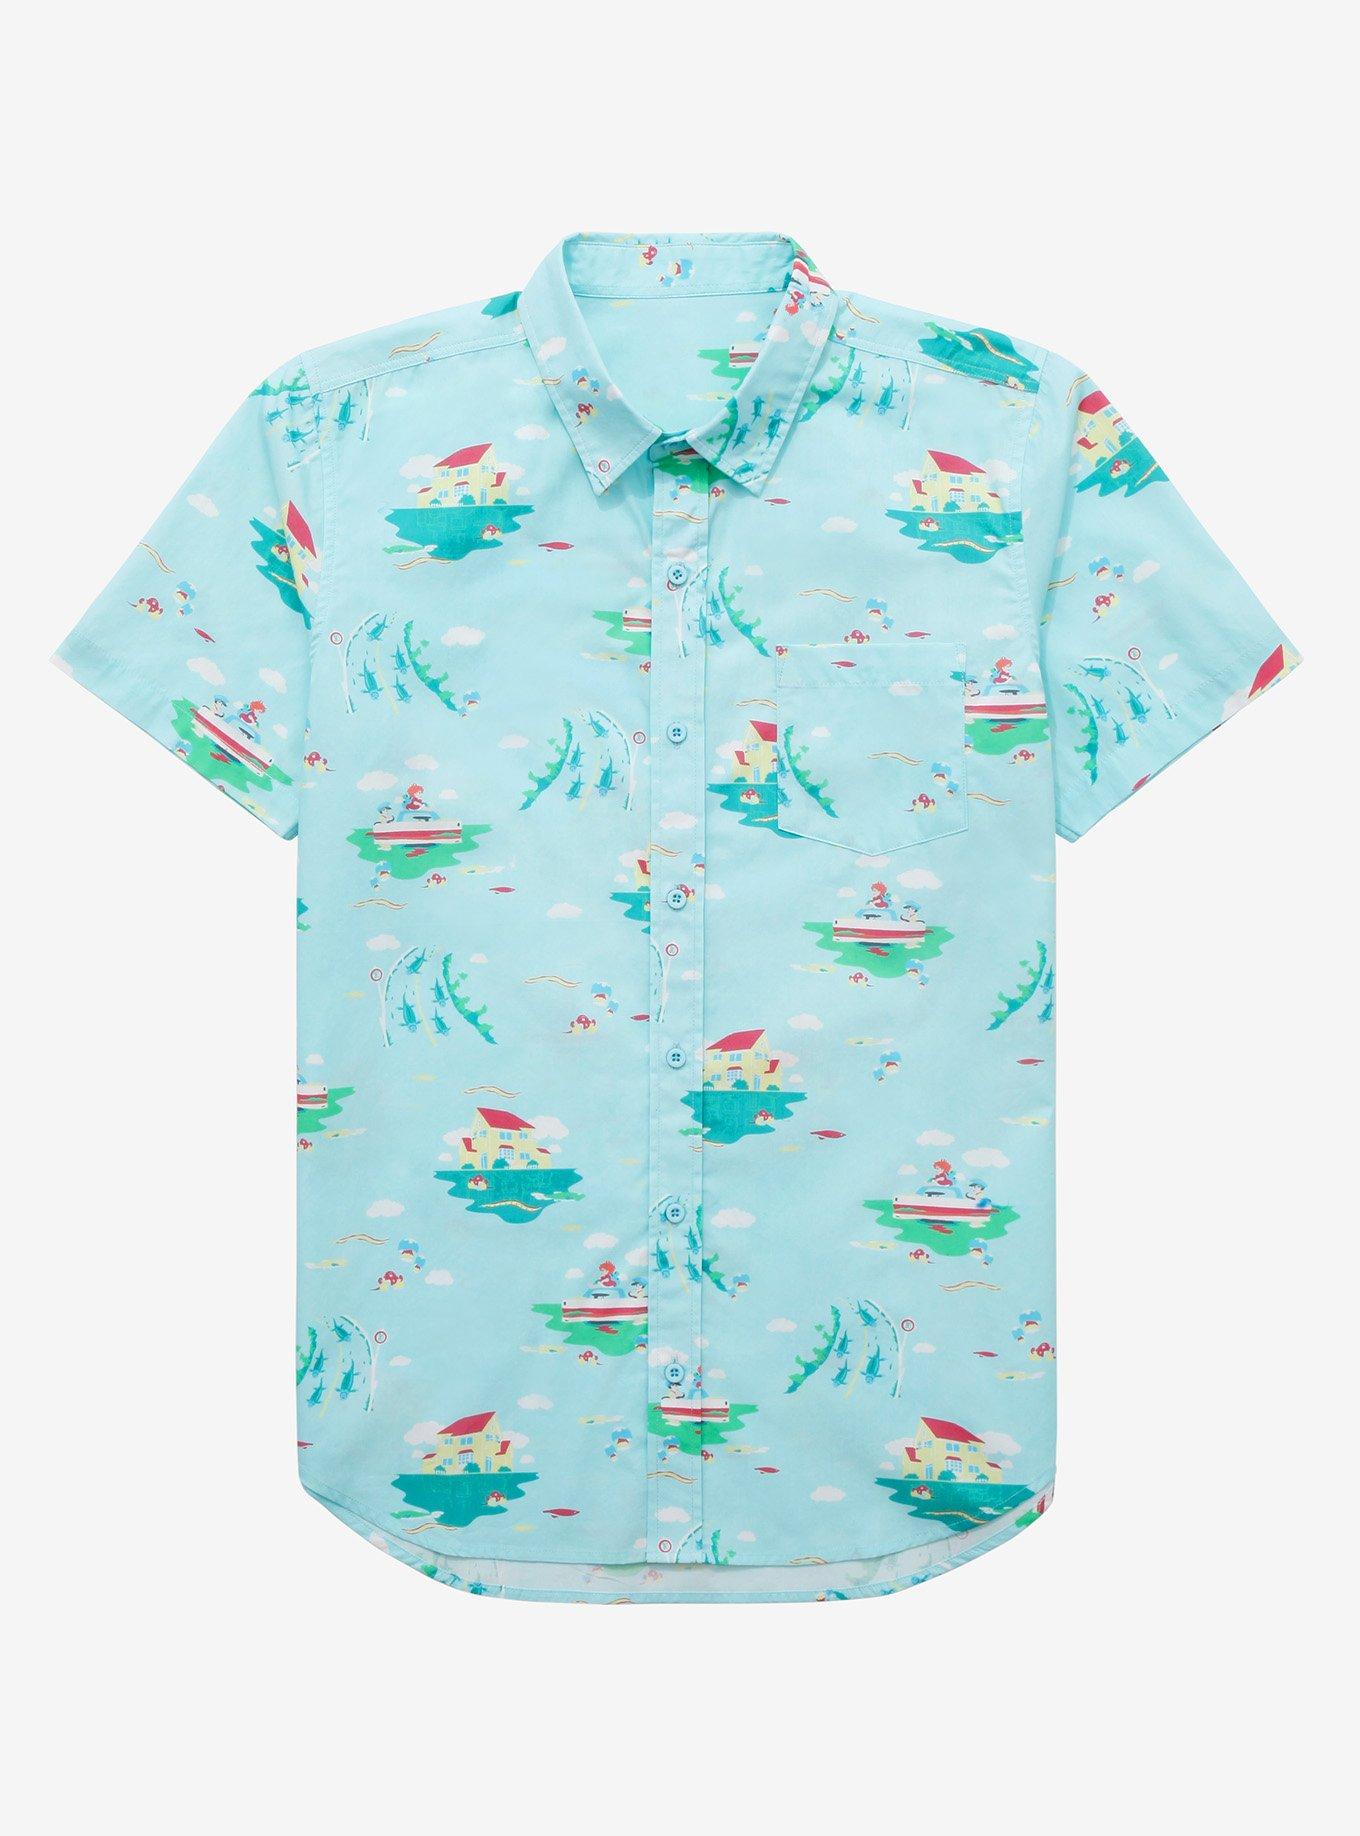 Studio Ghibli Ponyo Ocean Scenery Woven Button-Up - BoxLunch Exclusive ...